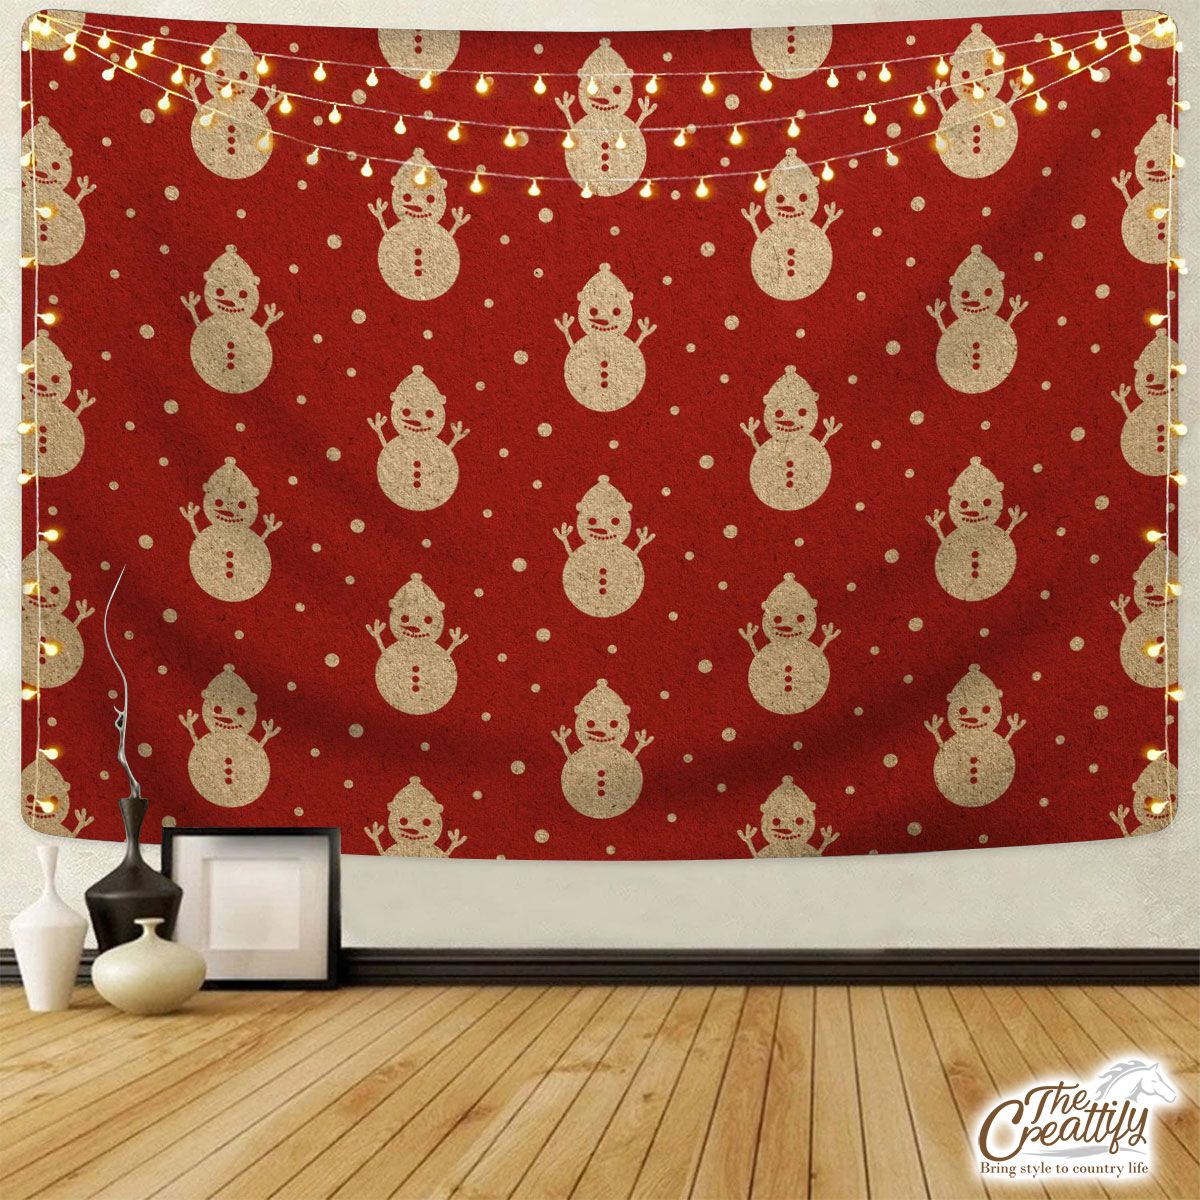 Christmas Snowman Seamless Pattern Tapestry